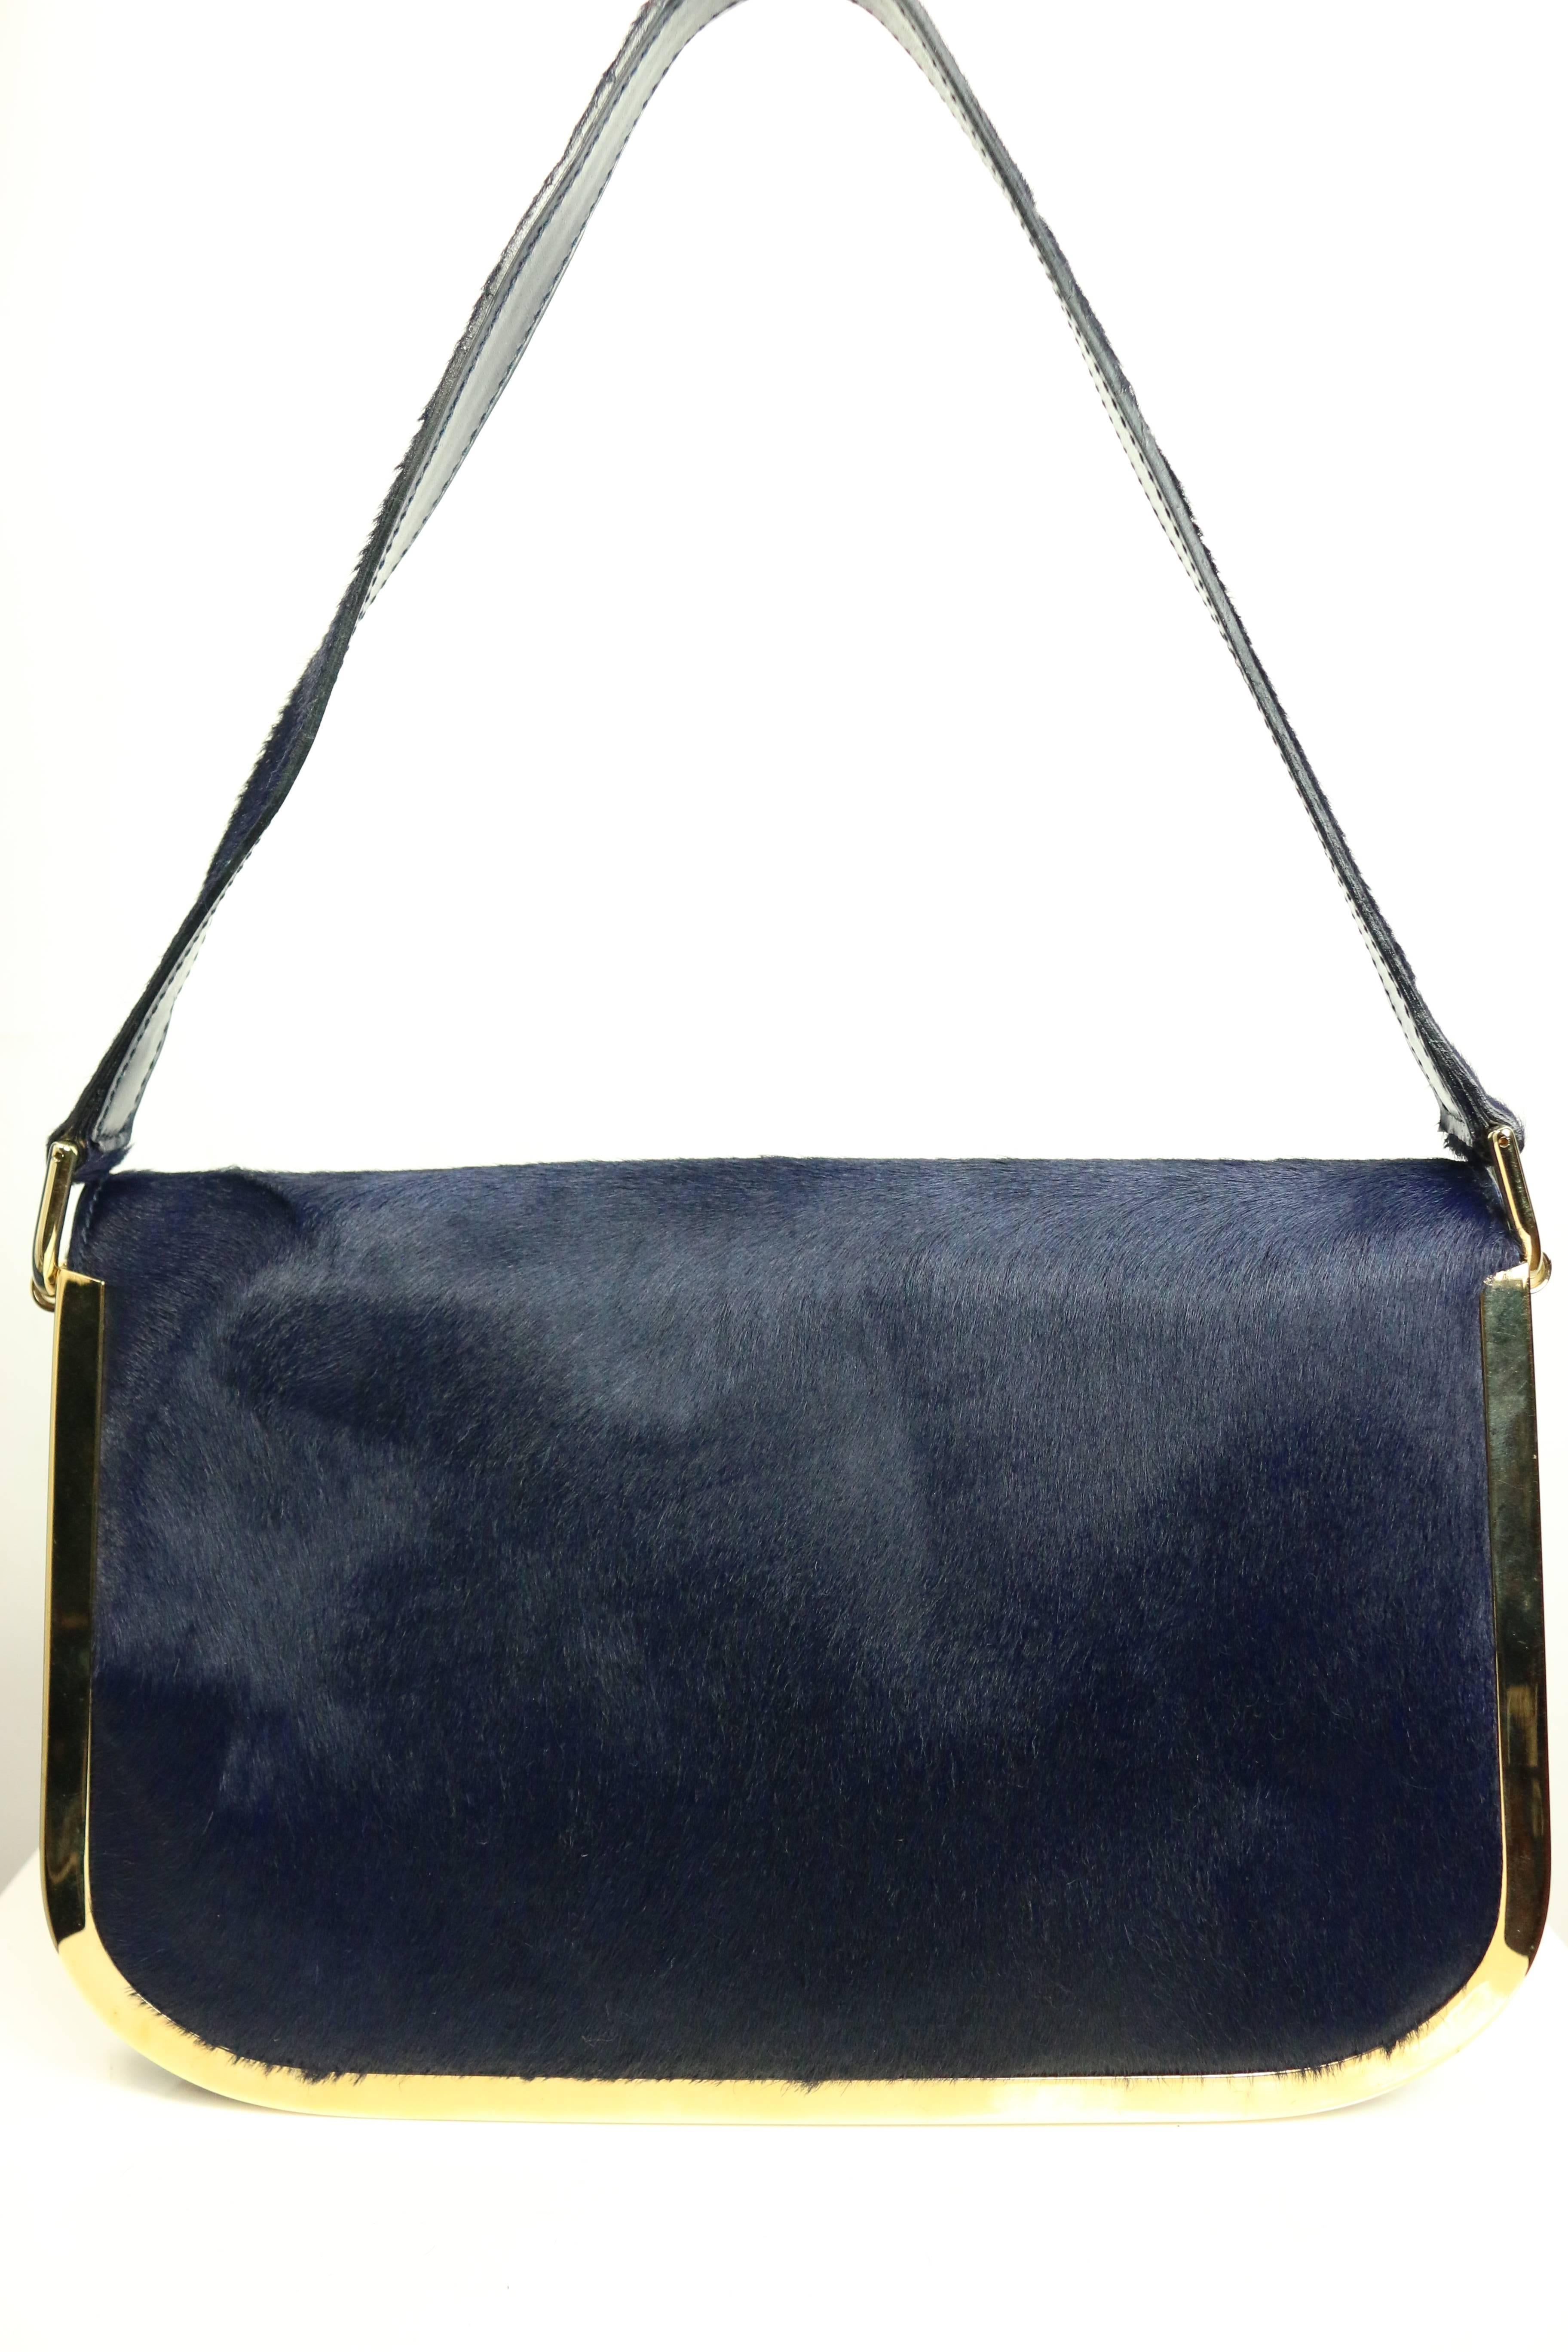 - Vintage Gucci by Tom Ford navy horse-bit gold metal toned piping flap handbag from fall 1996 collection. This handbag was featuring in one of the famous Mario Testino Gucci fall 1996 champagne. 

- Featuring two layers suede interior. 

-